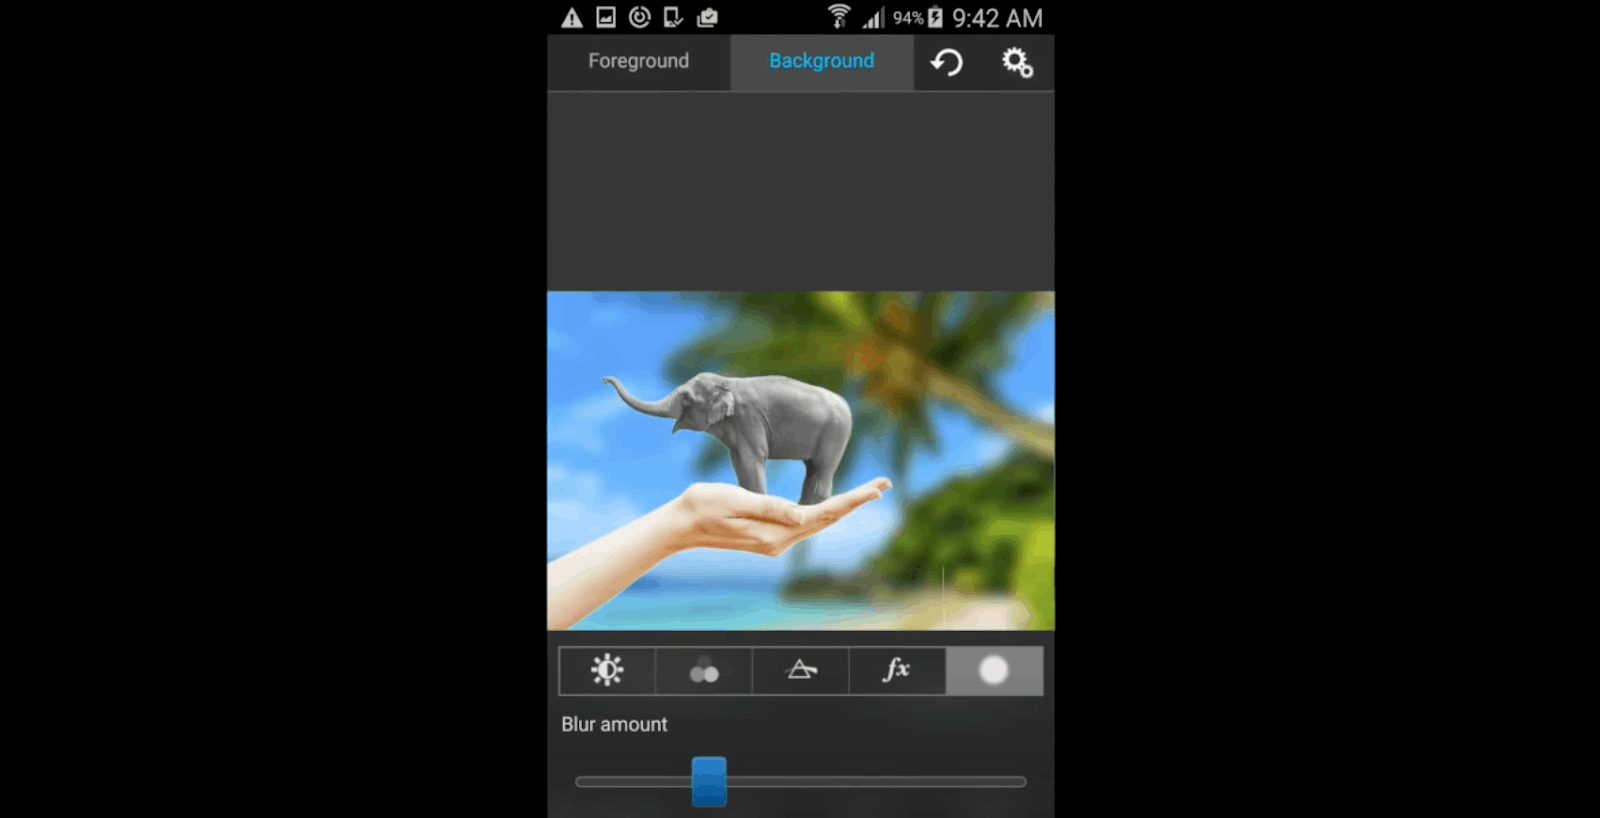 Superimpose App - See How to Download